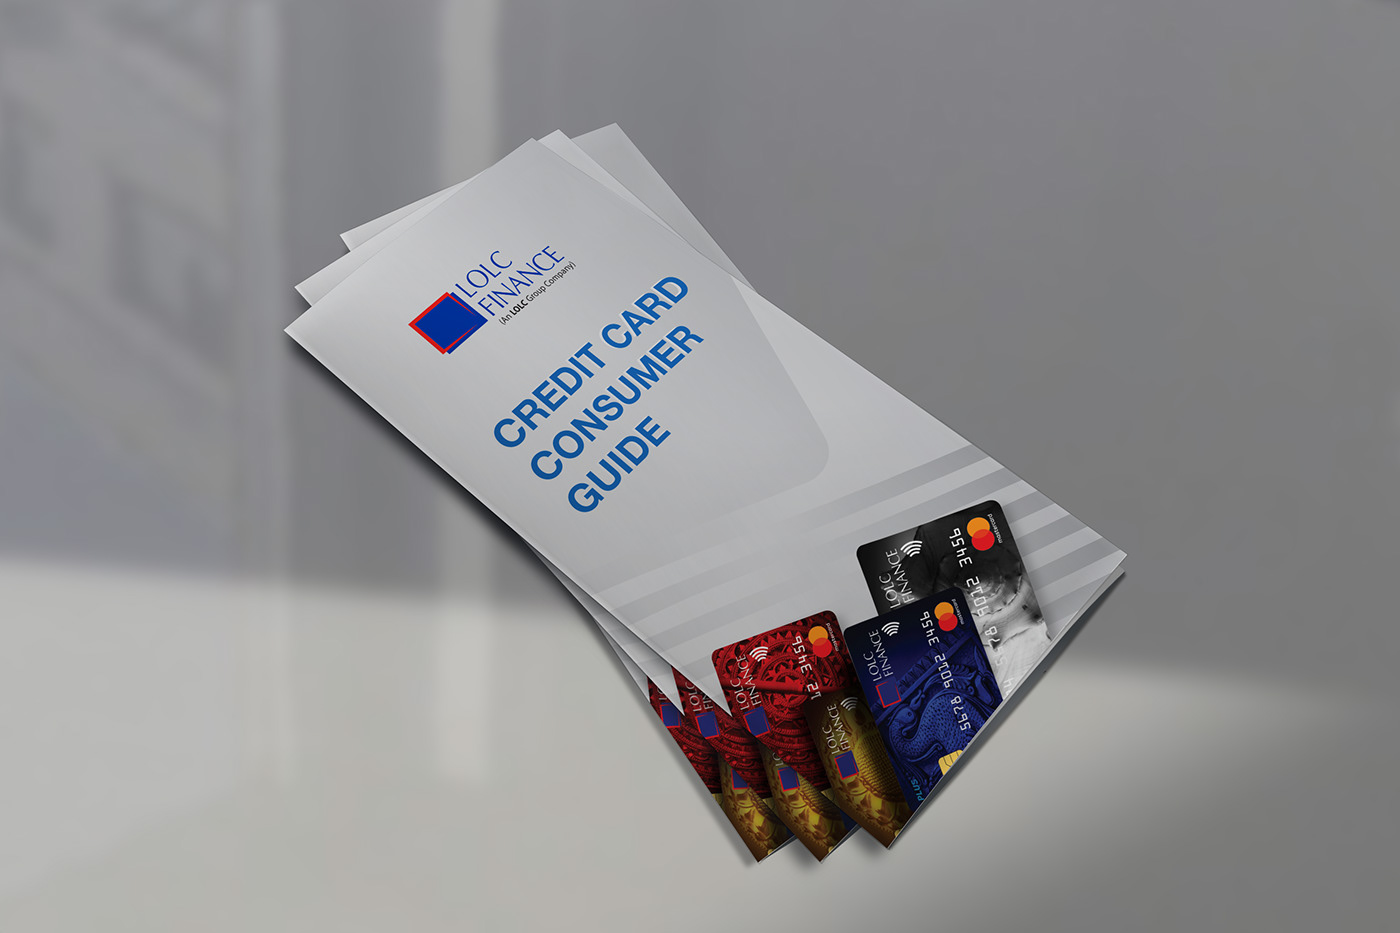 LOLC Consumer Guide leaflet design credit card